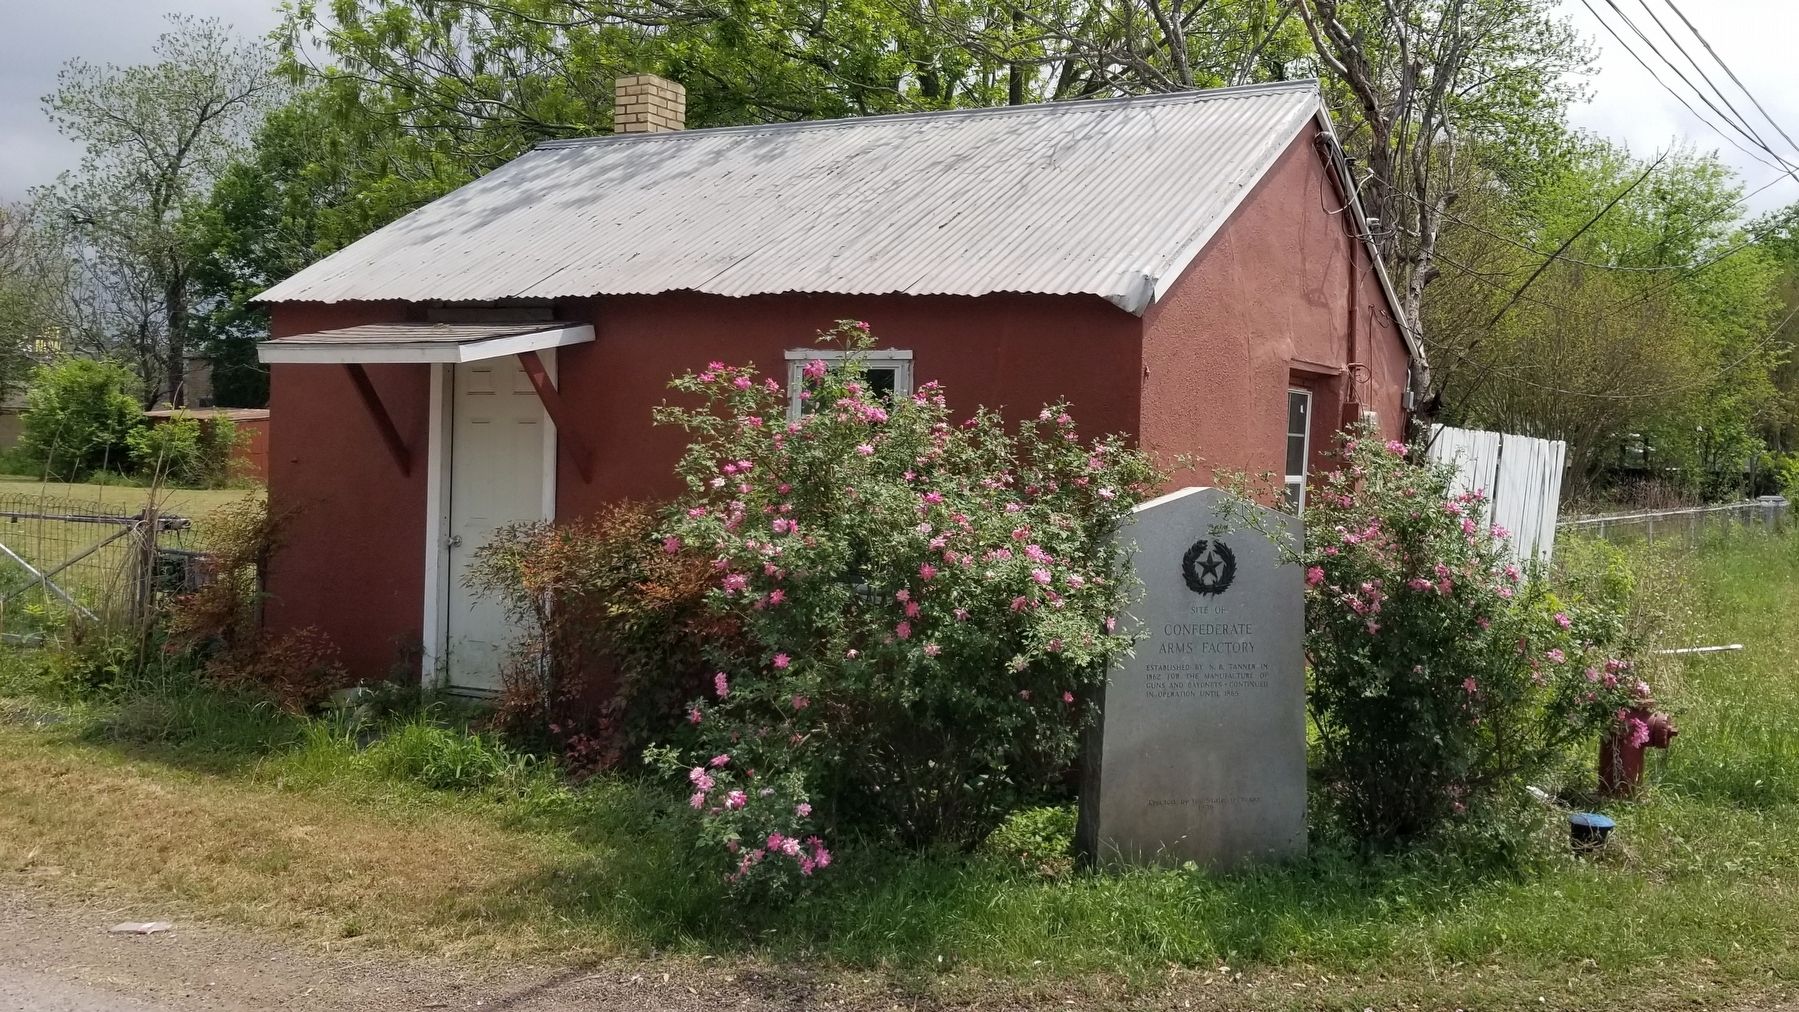 Site of Confederate Arms Factory Marker image. Click for full size.